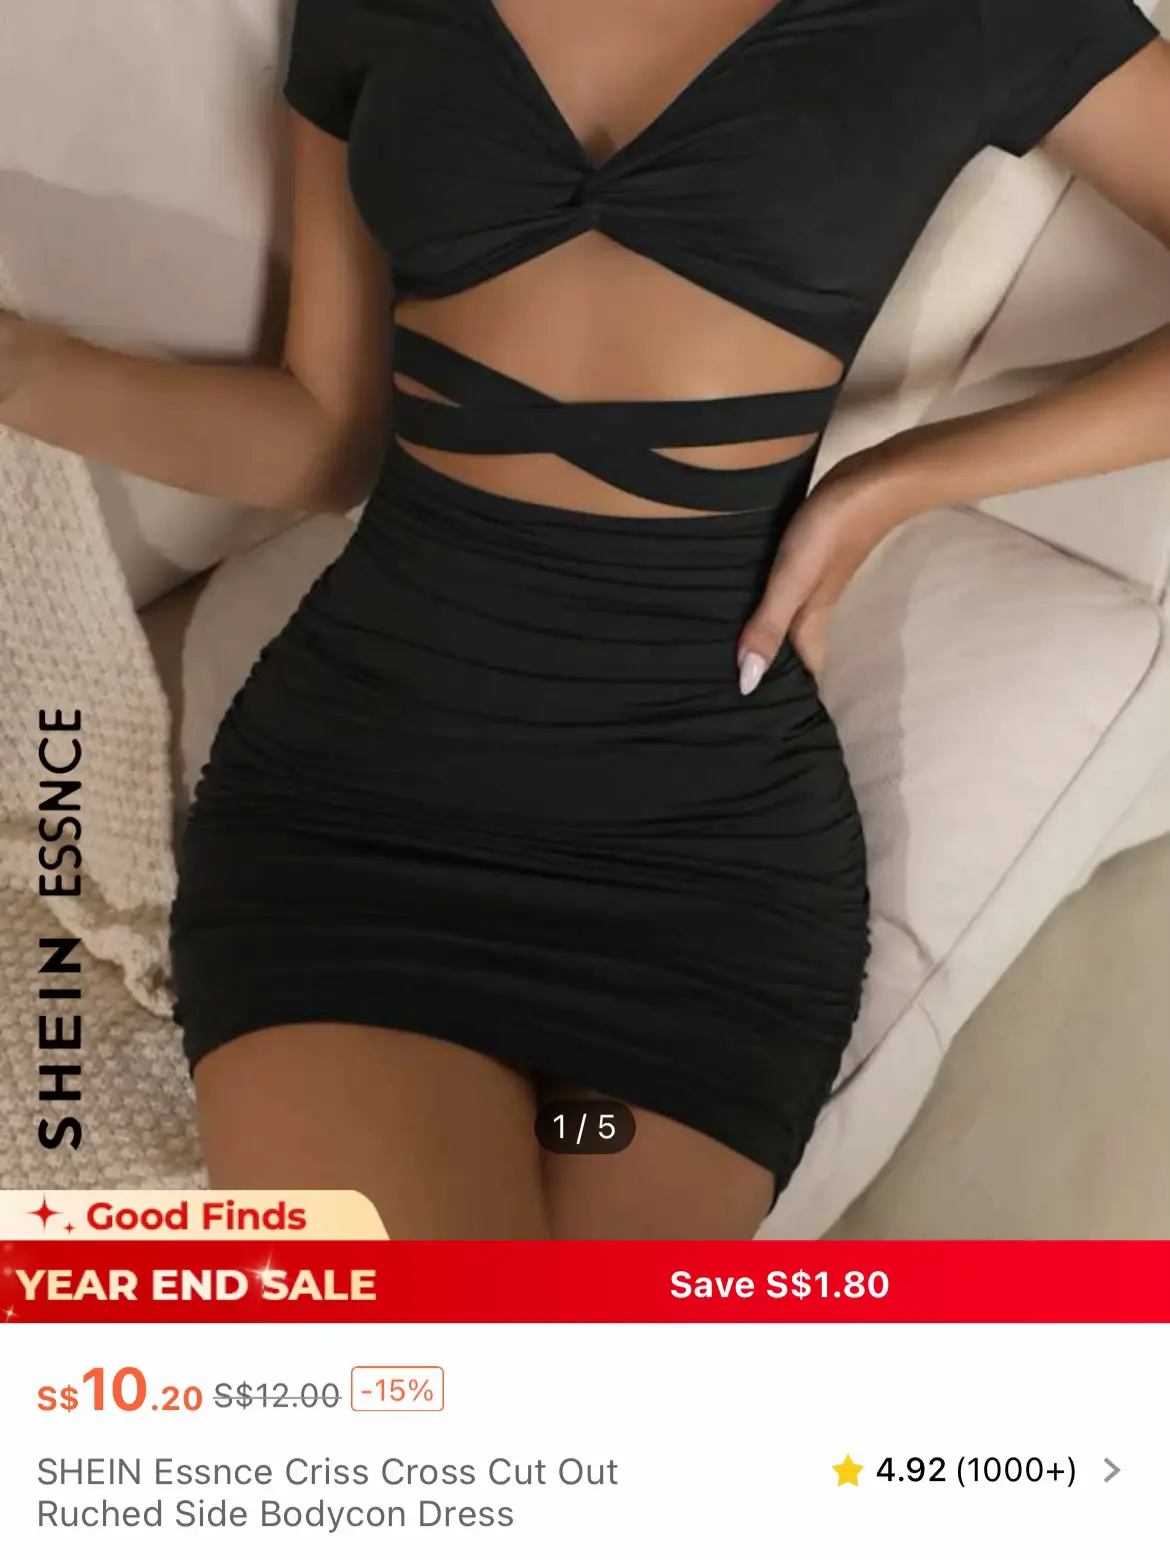 More for Less: SKIMS $13 Dupe from SHEIN